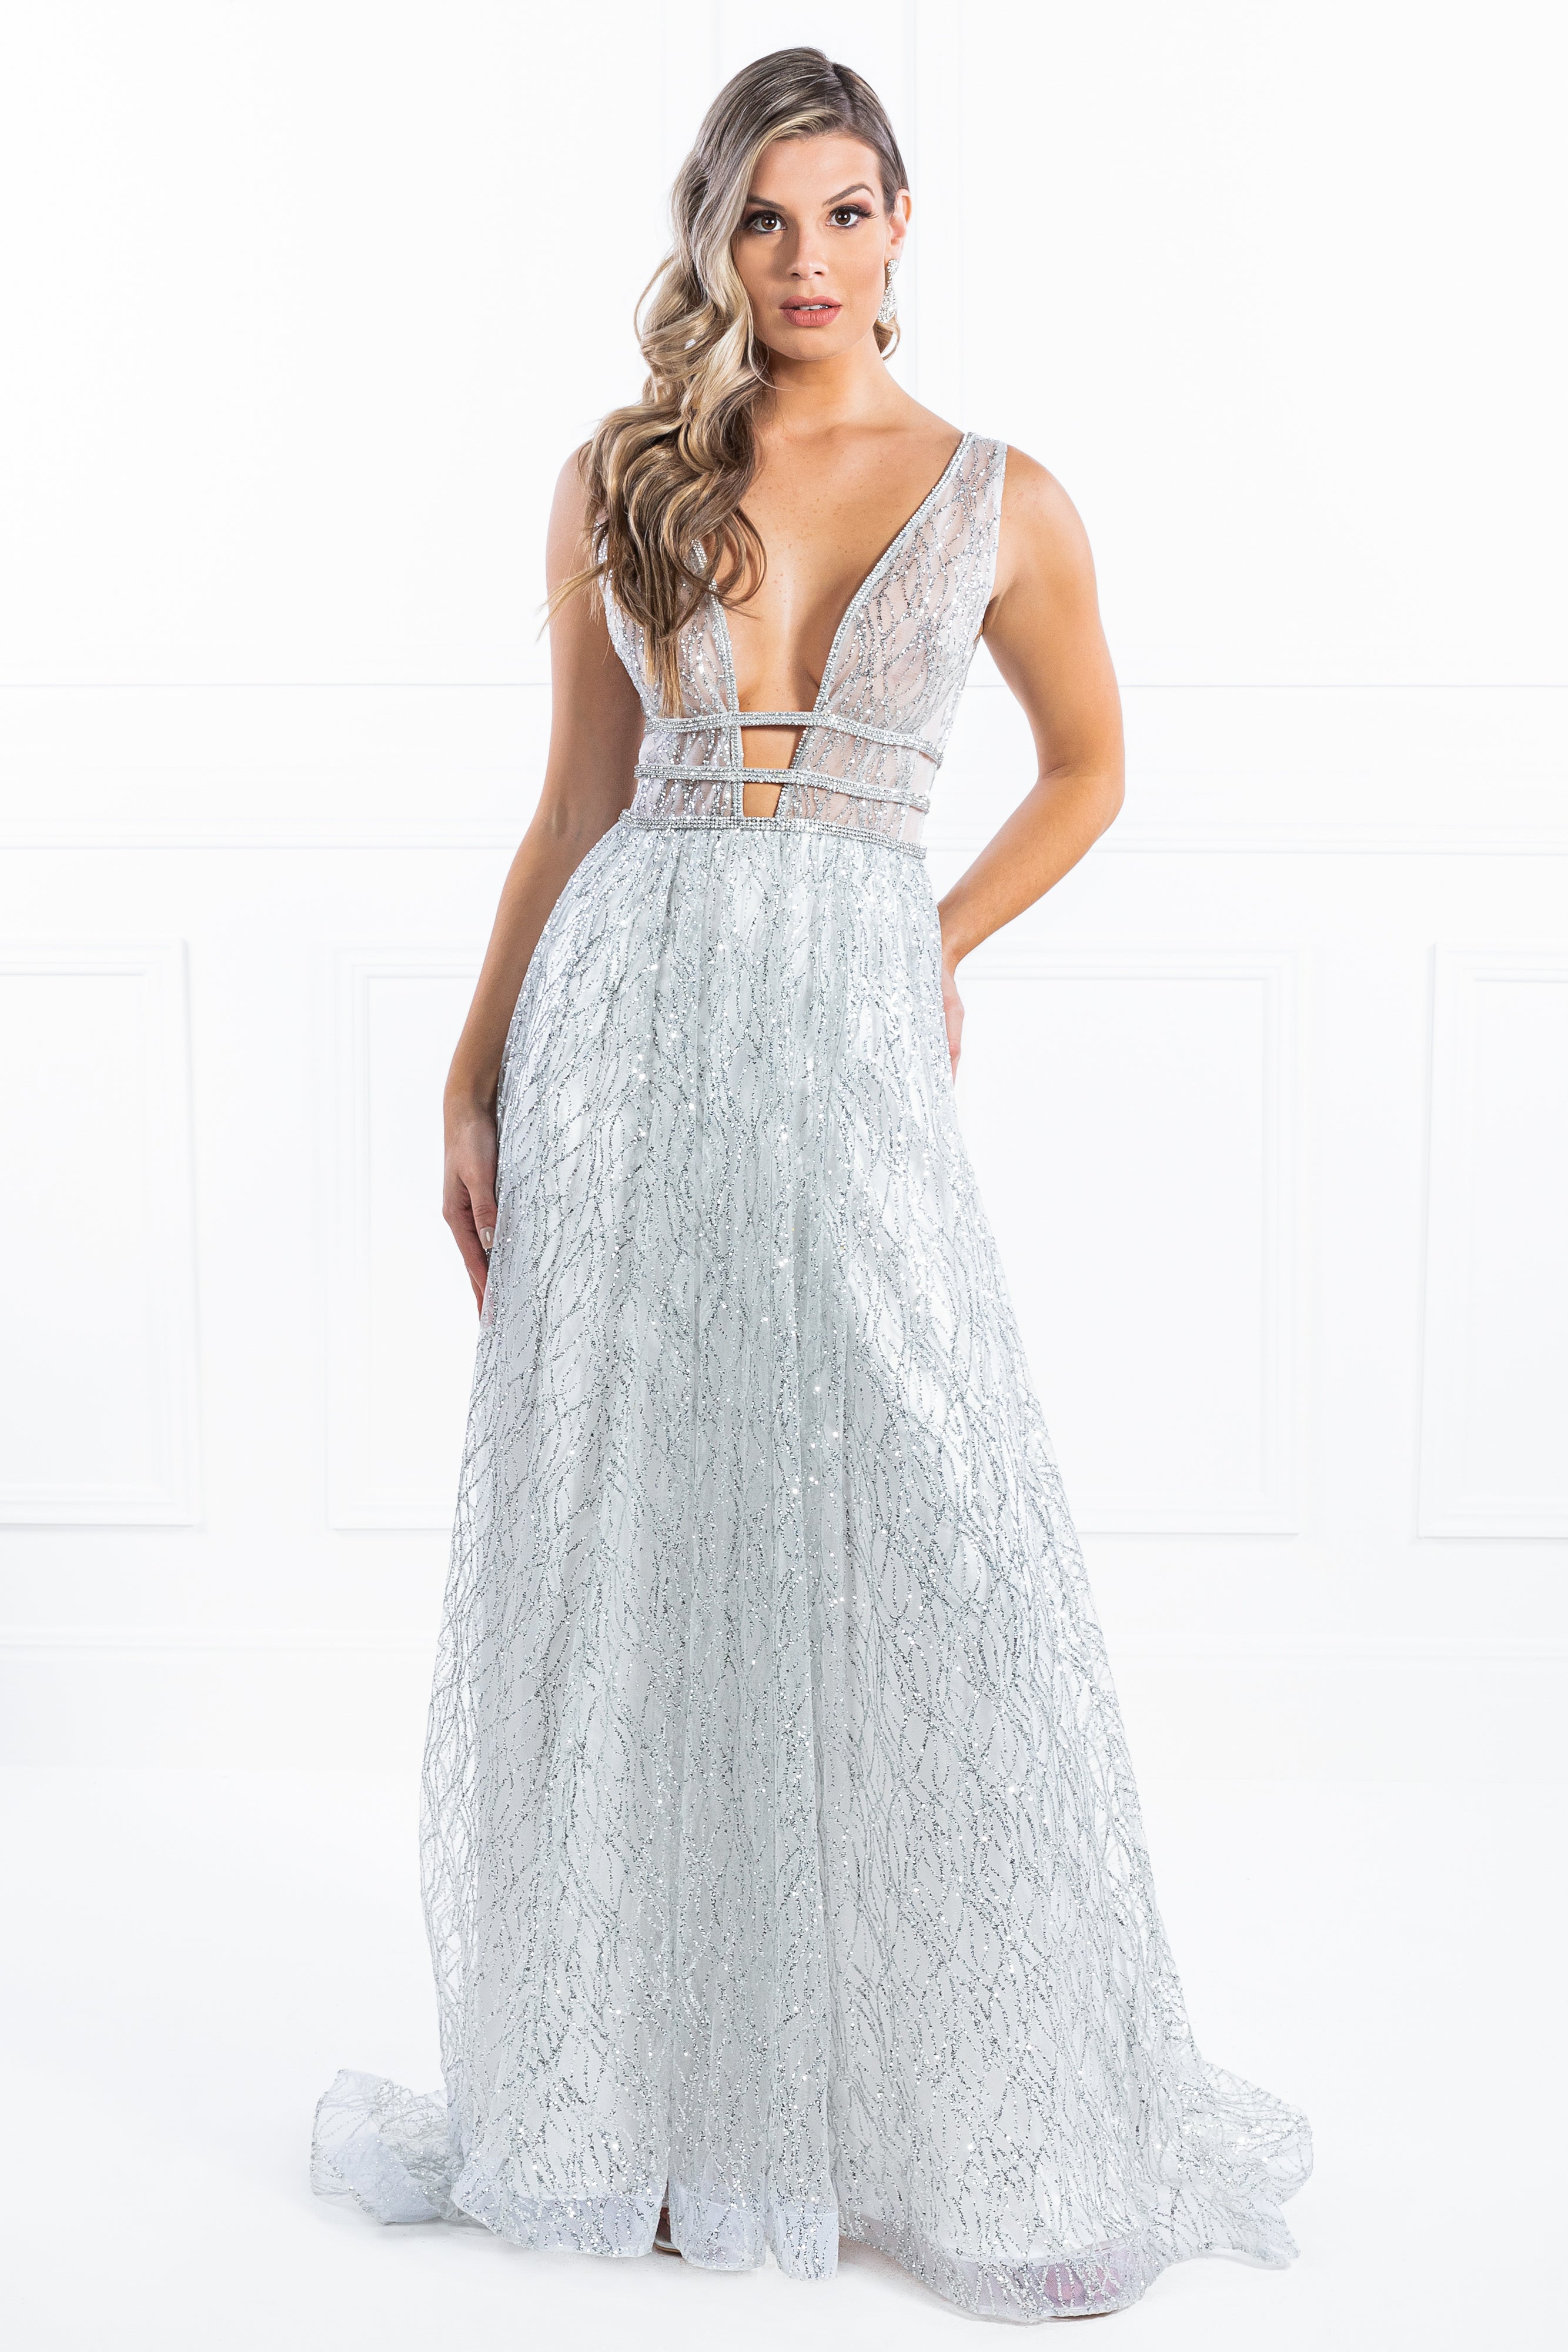 Honey Couture ENYA White & Silver Glitter Formal Gown